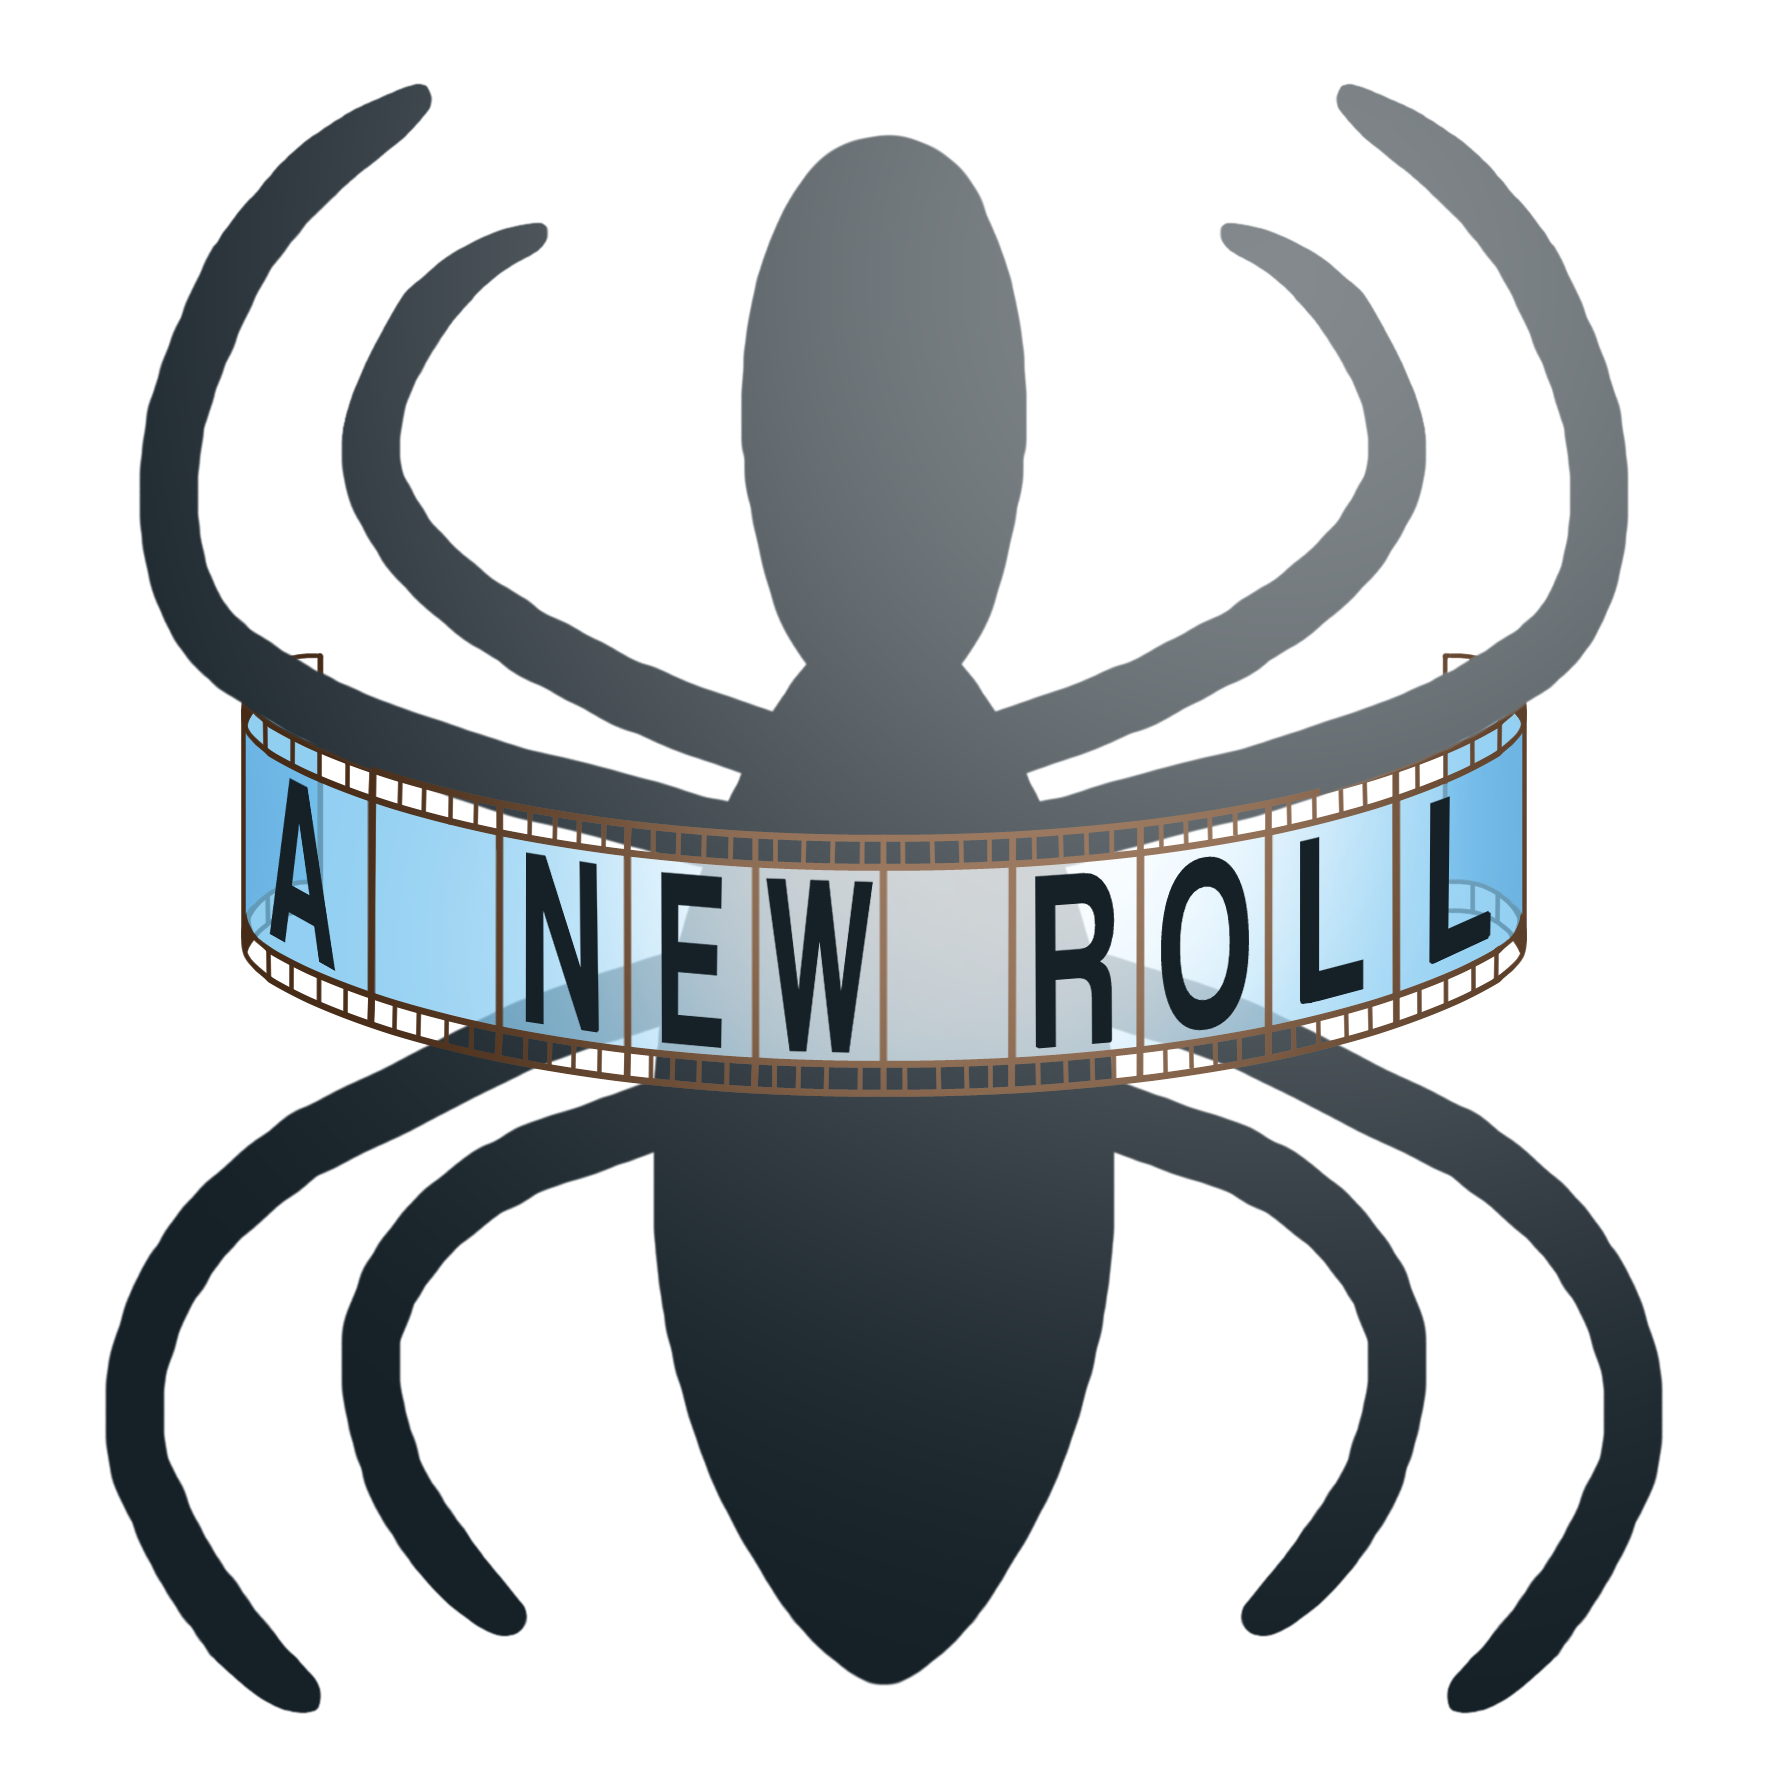 A logo of a spider with four legs that has a gradient on it, making it look like light is shining at it from above. In front of that logo is an additional subtitle, rendered to look like a film reel, with letters adorned on each frame to spell out, ‘A New Roll.’